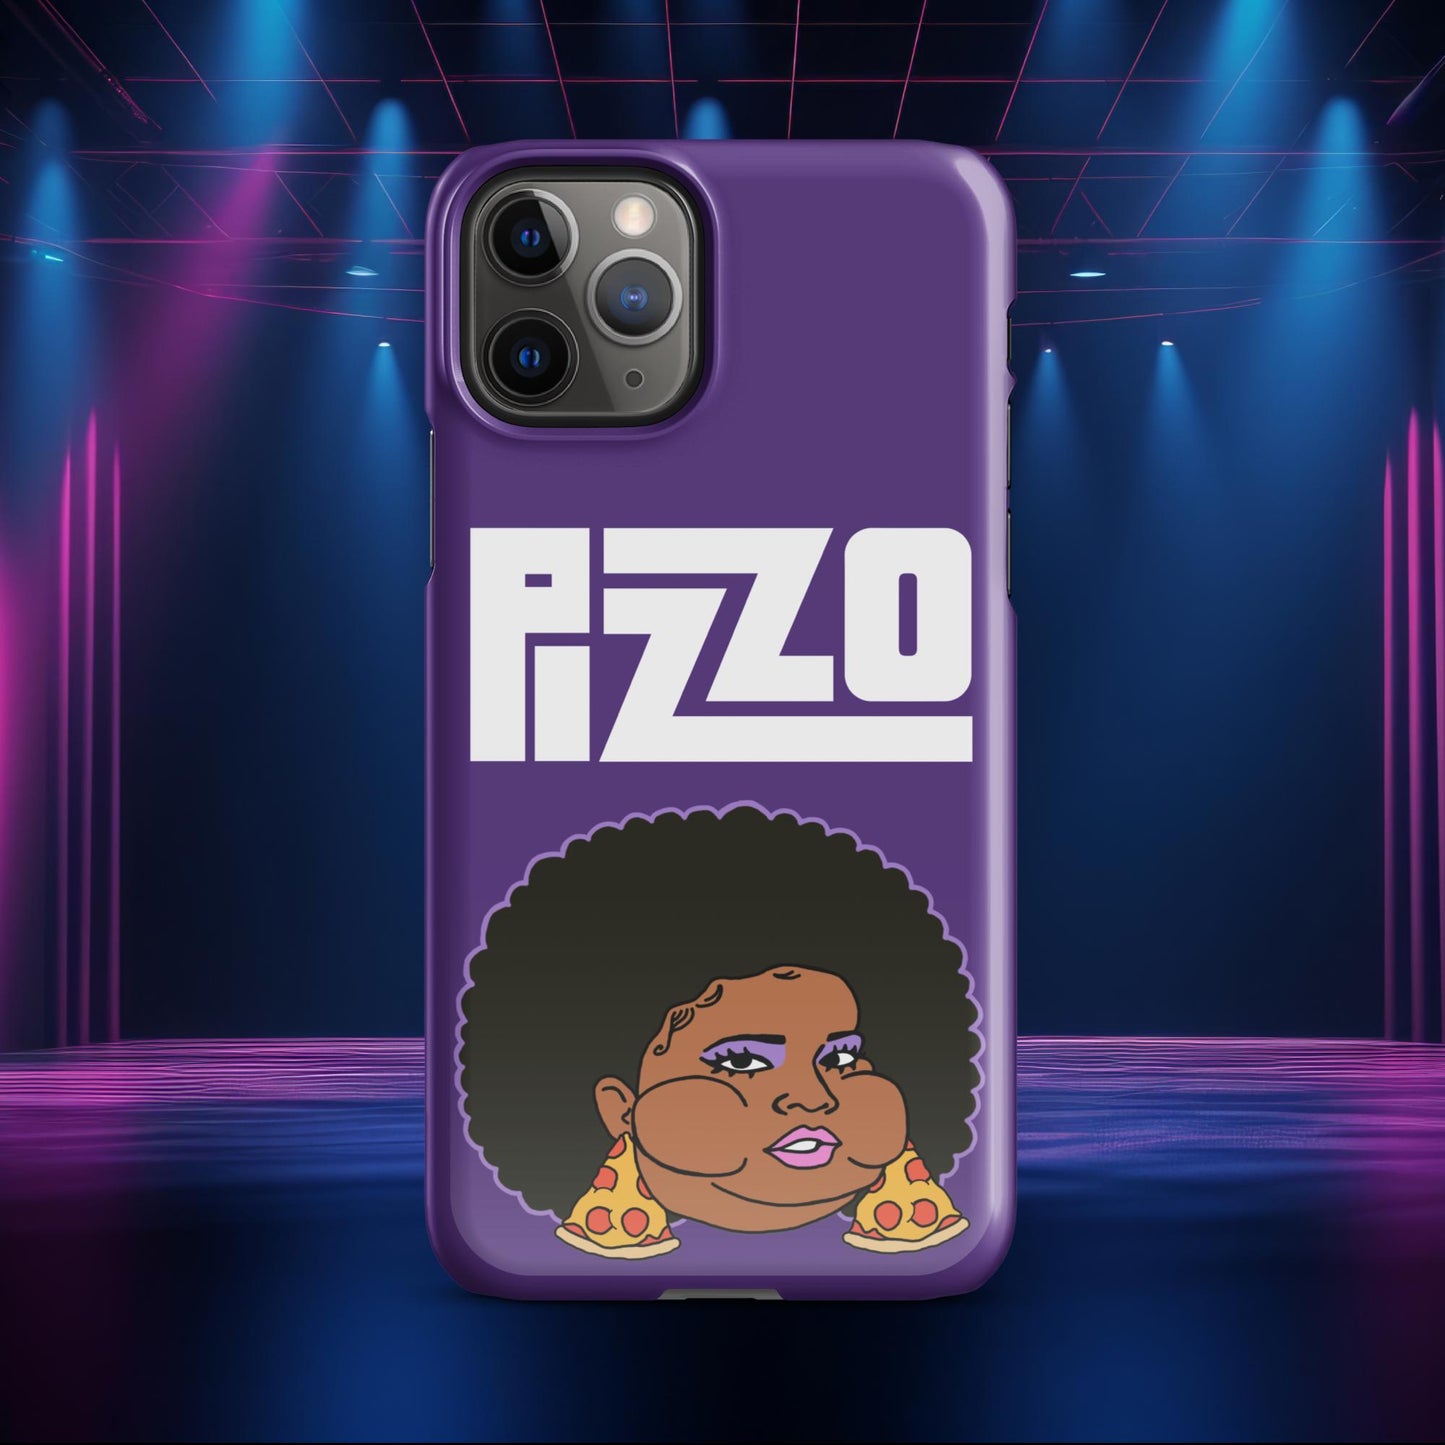 Pizzo Lizzo Pizza Lizzo Merch Lizzo Gift Song Lyrics Lizzo Snap case for iPhone Next Cult Brand